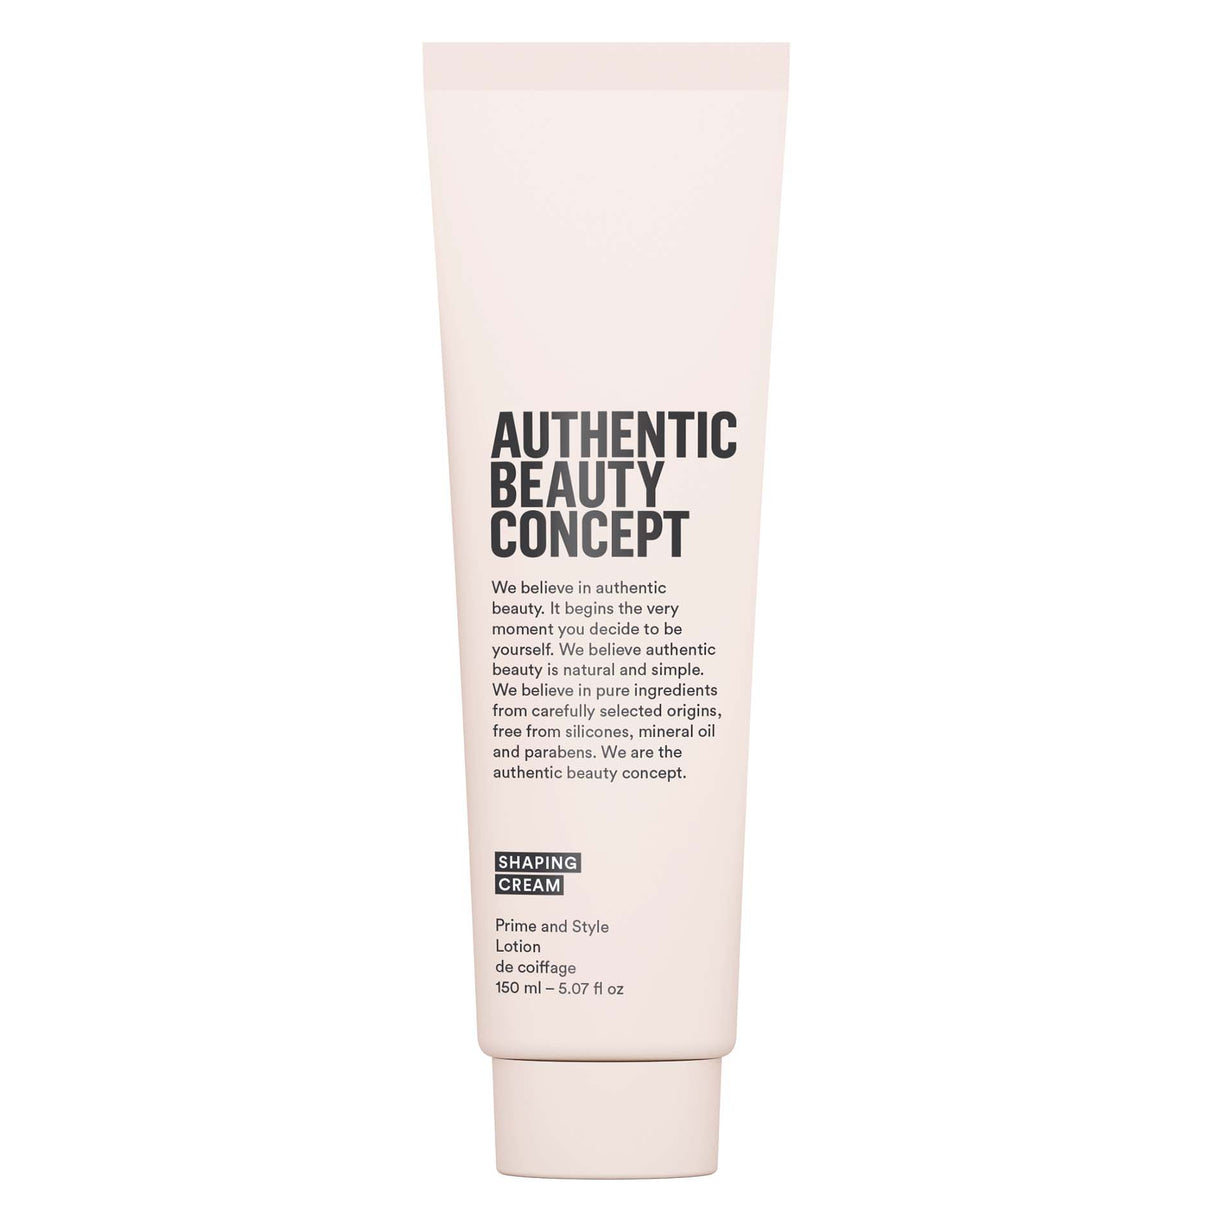 Shaping Cream-Authentic Beauty Concept